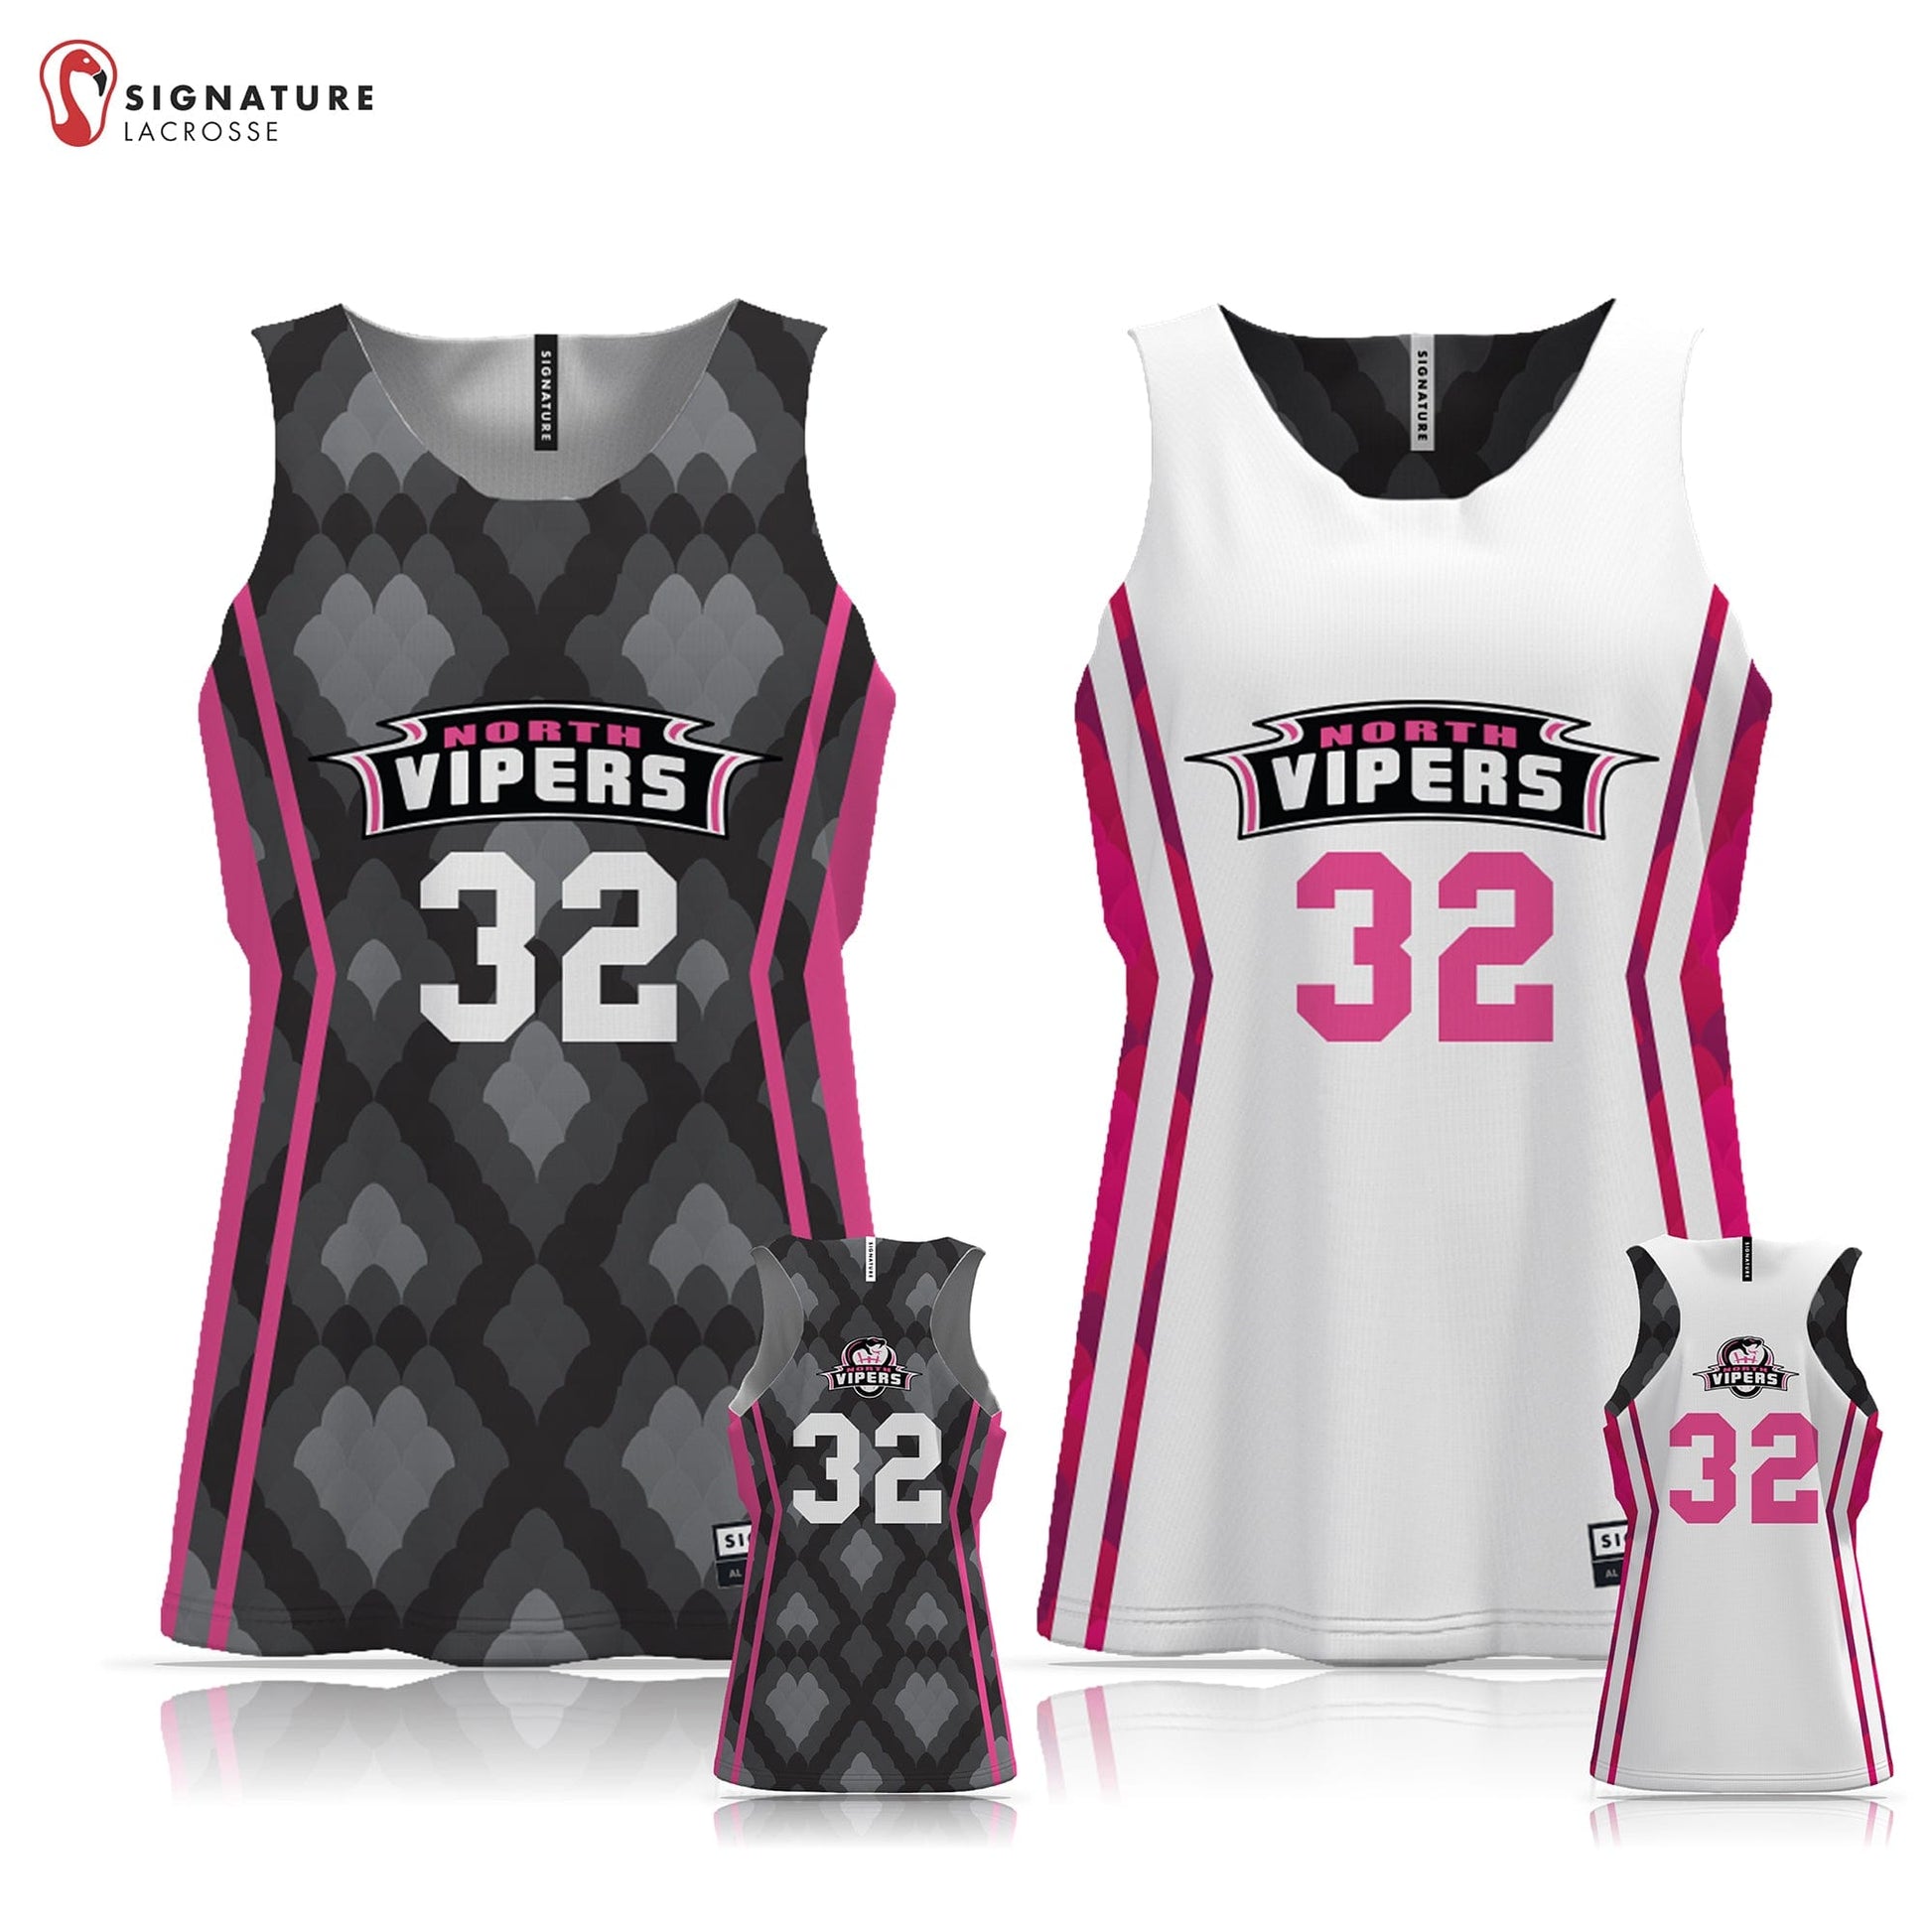 North Vipers Women's 3 Piece Pro Game Package Signature Lacrosse